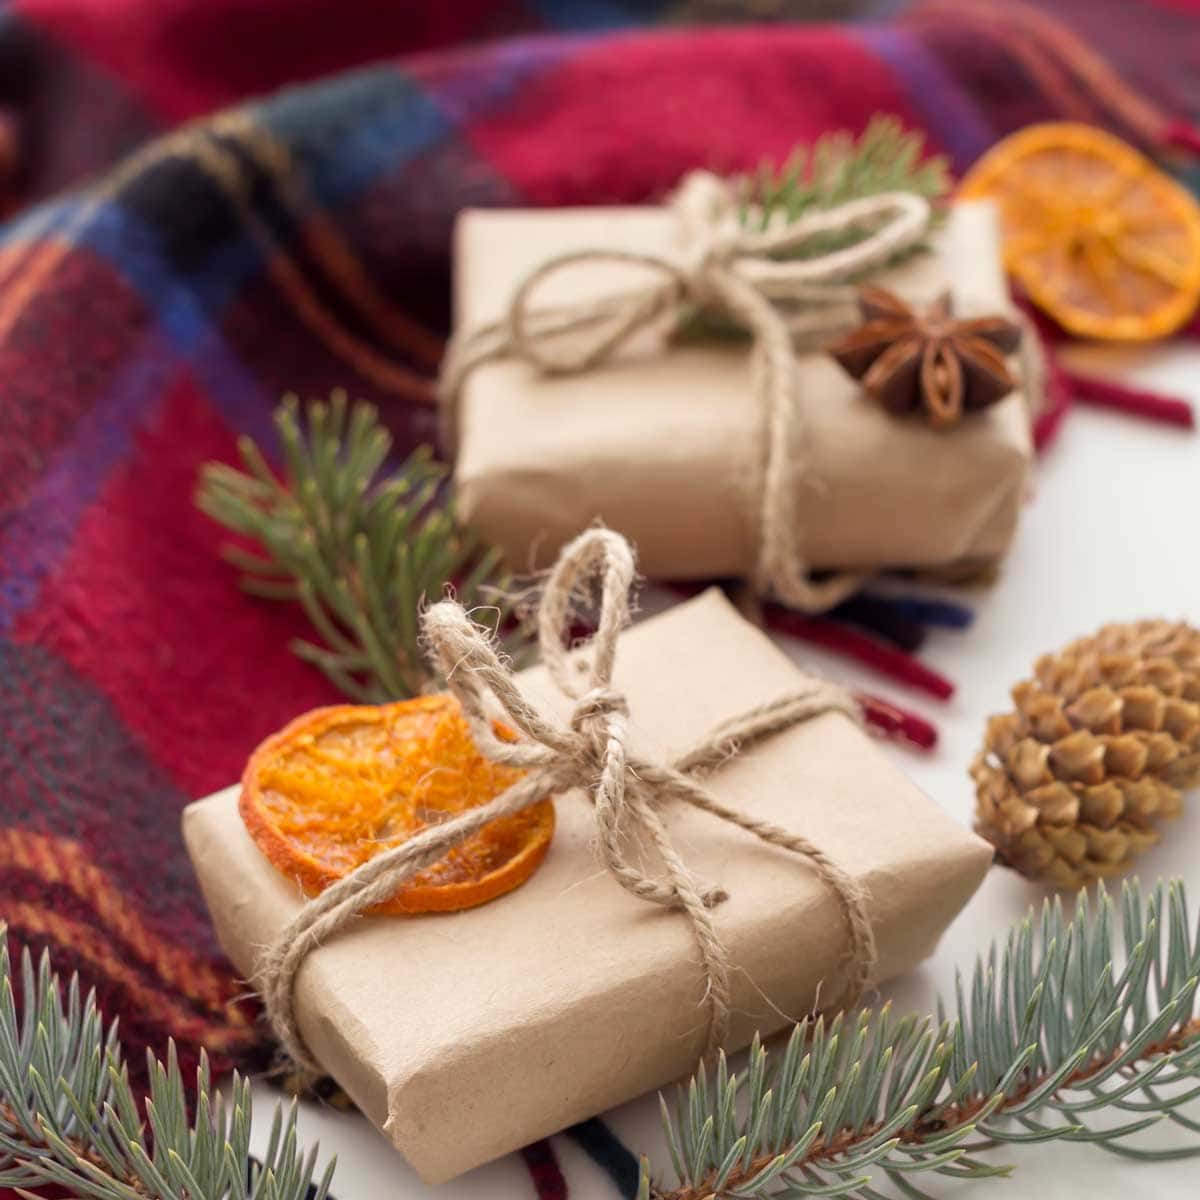 dried orange slice on top of a brown wrapped gift.